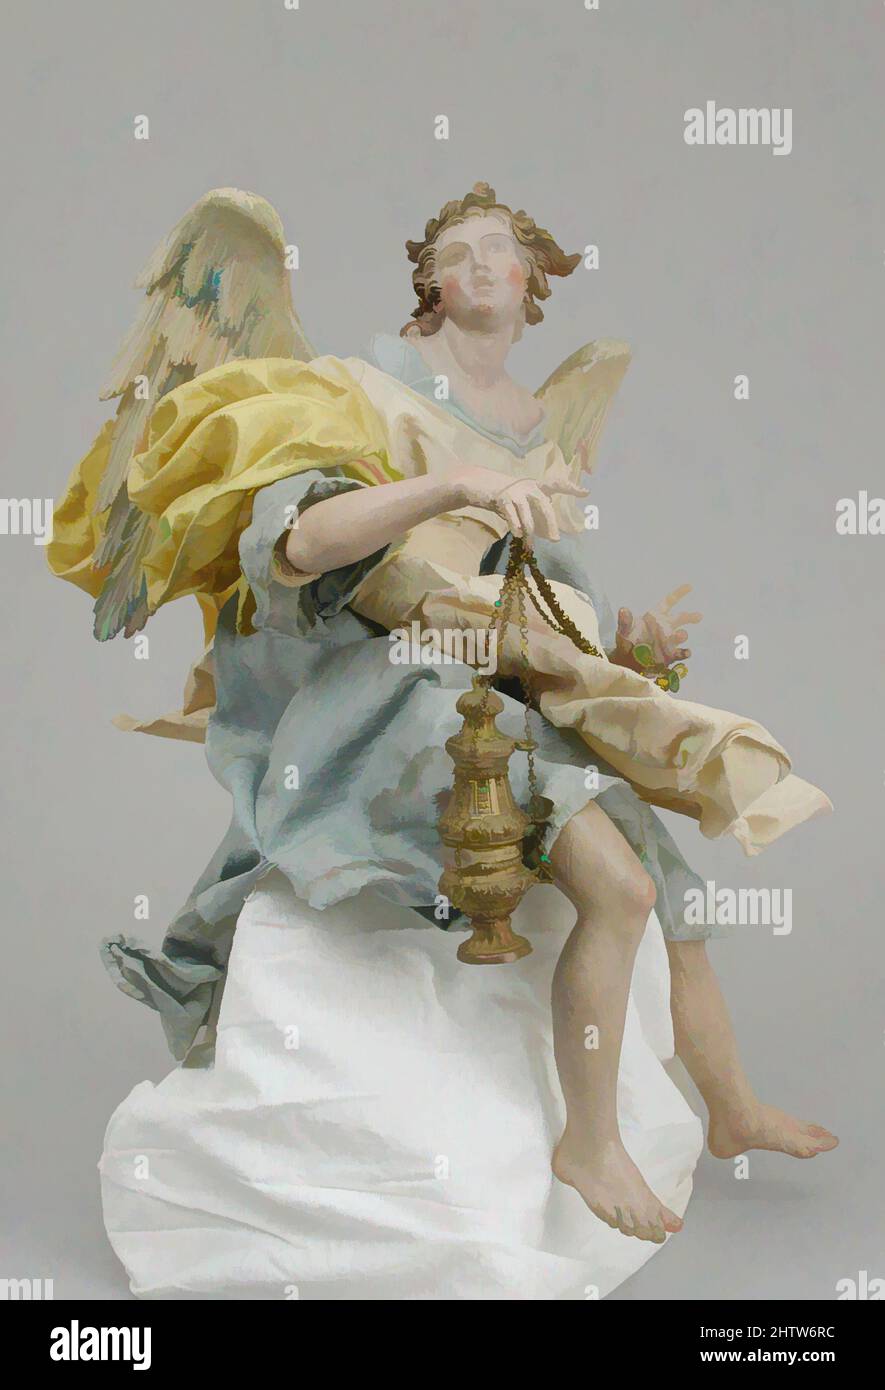 Art inspired by Angel, second half 18th century, Italian, Naples, Polychromed terracotta head; wooden limbs and wings; body of wire wrapped in tow; various fabrics, H. 15 3/4 in. (40 cm.), Crèche, Classic works modernized by Artotop with a splash of modernity. Shapes, color and value, eye-catching visual impact on art. Emotions through freedom of artworks in a contemporary way. A timeless message pursuing a wildly creative new direction. Artists turning to the digital medium and creating the Artotop NFT Stock Photo